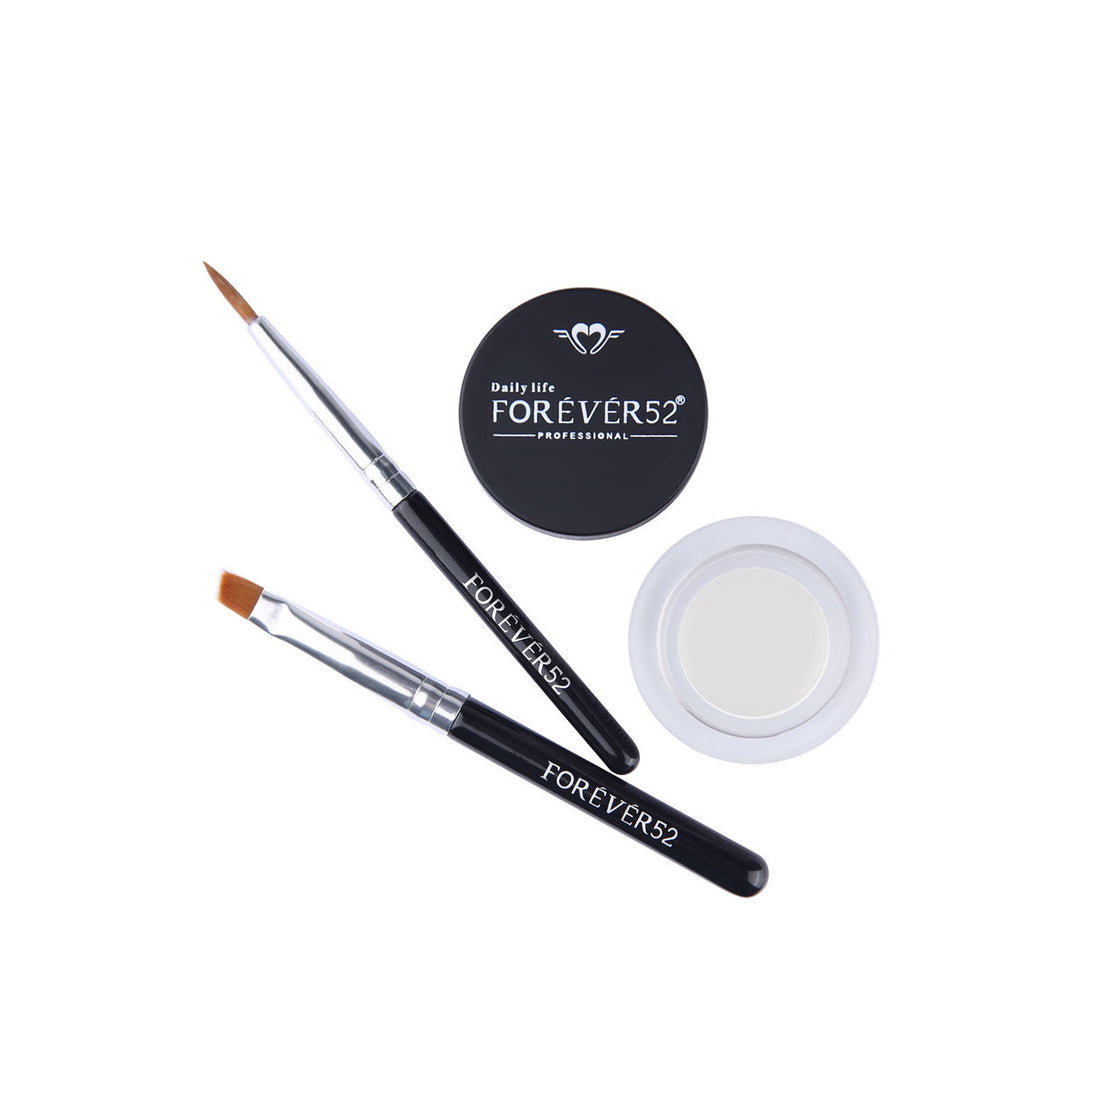 Daily Life Forever52 Long Wear Gel Eyeliner And Tattoo - Gt007 (5Gm)